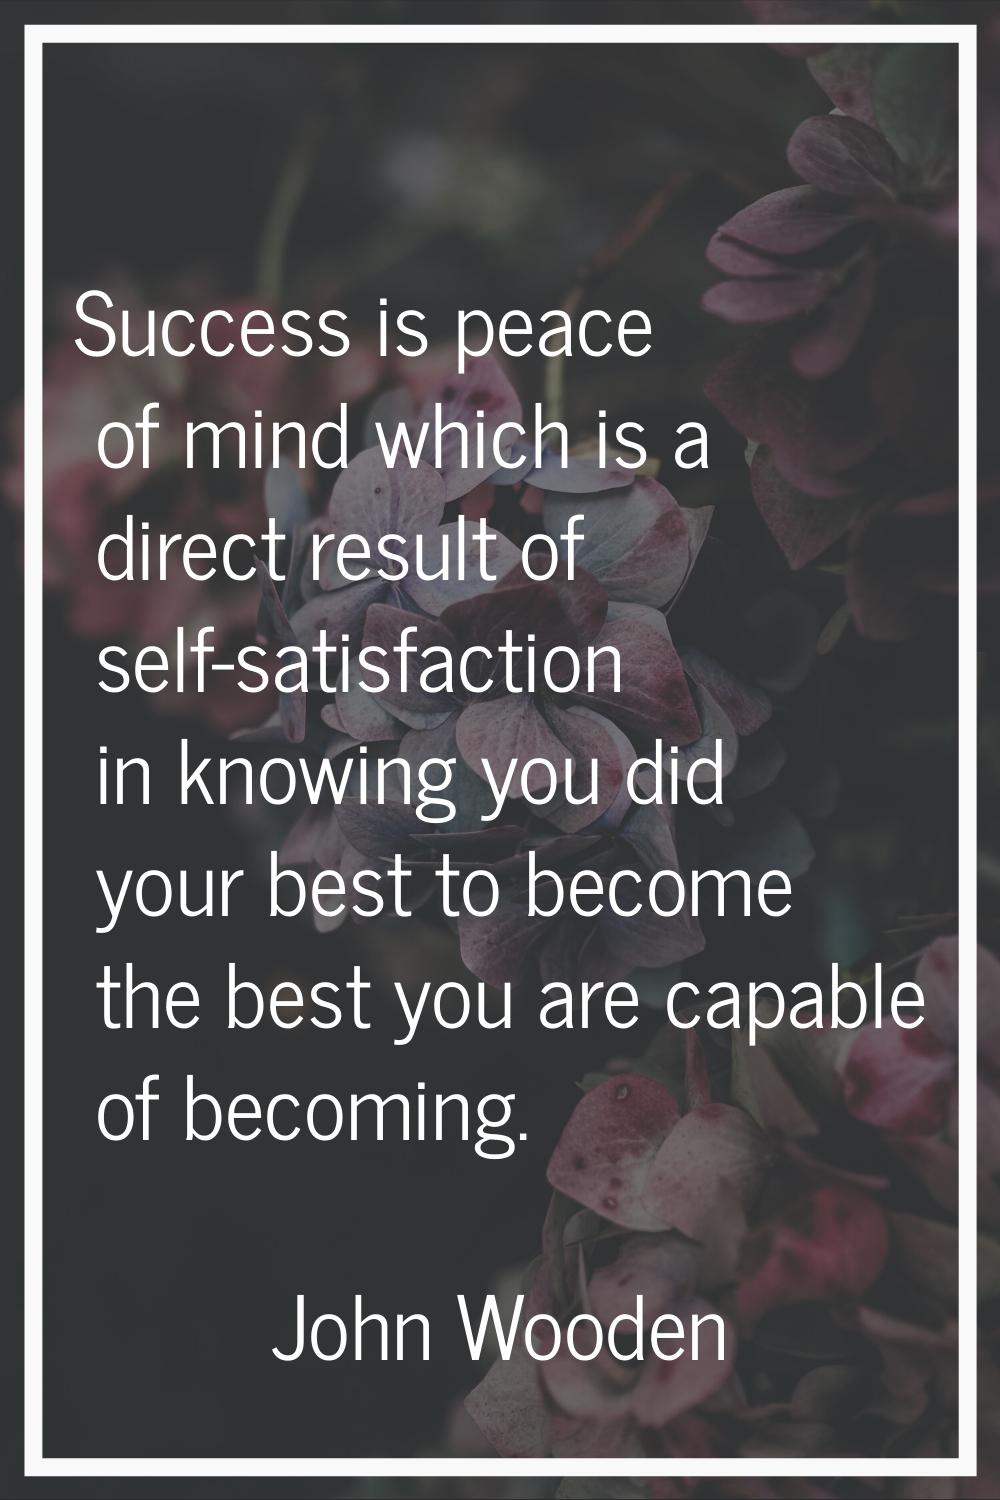 Success is peace of mind which is a direct result of self-satisfaction in knowing you did your best